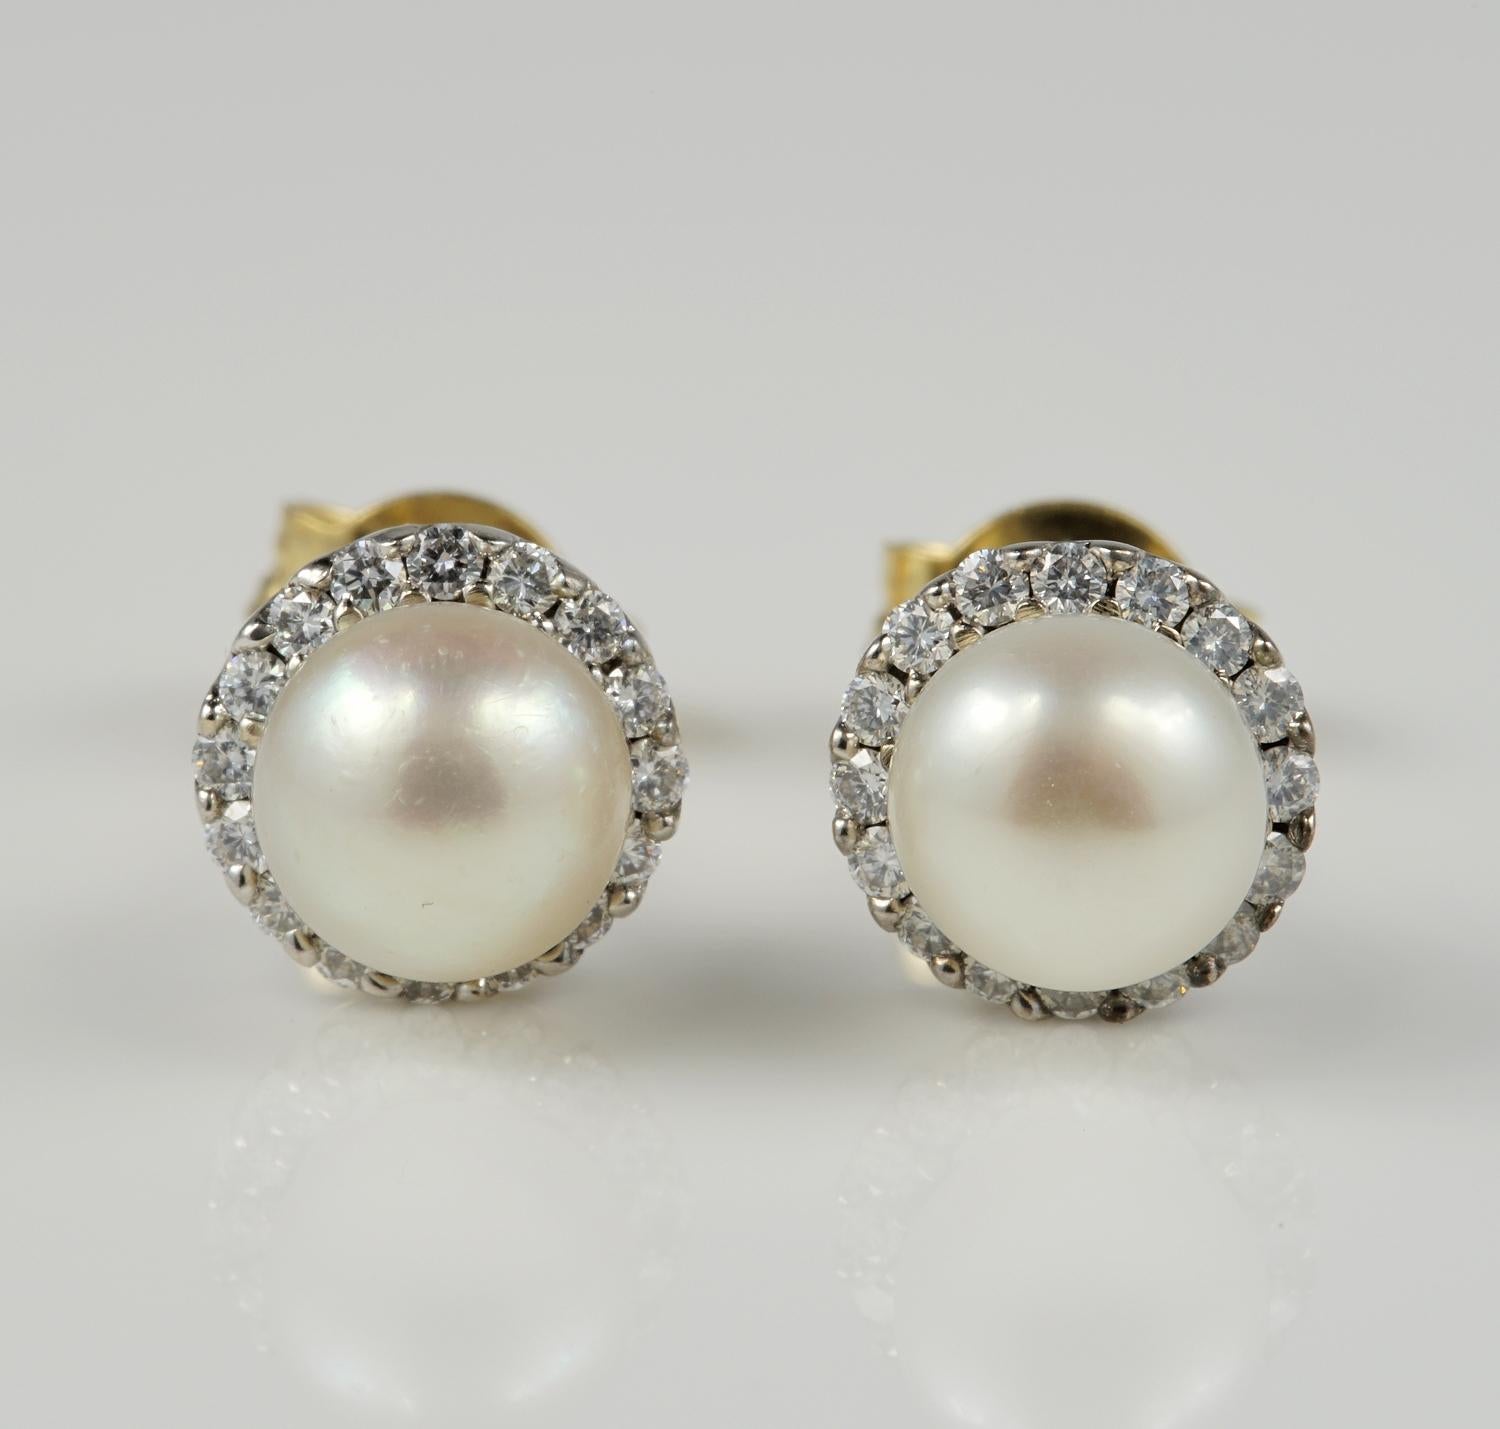 The Eternal Charm
Our fascination with Pearls is thousands of years old—no other gem has been so loved, for so long, by so many
These stunning stud earrings are from the late Art Deco period
Simple designed yet so infinitely charming and